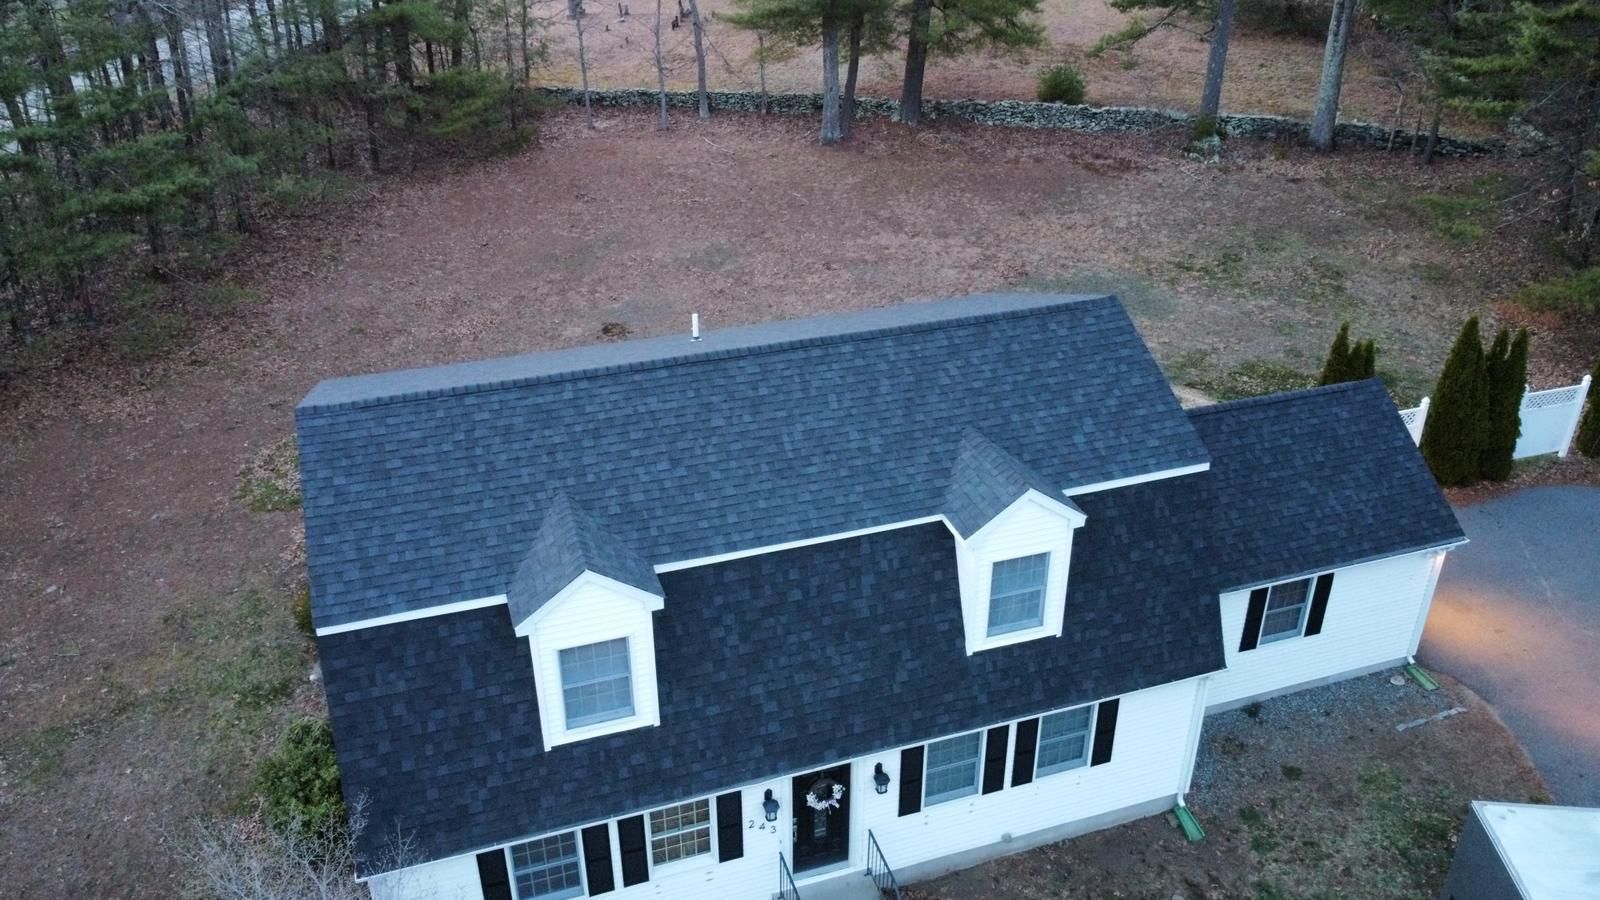 Overhead view of a Conneticut home with a new shingle roof installed by Hammerhead Roofing